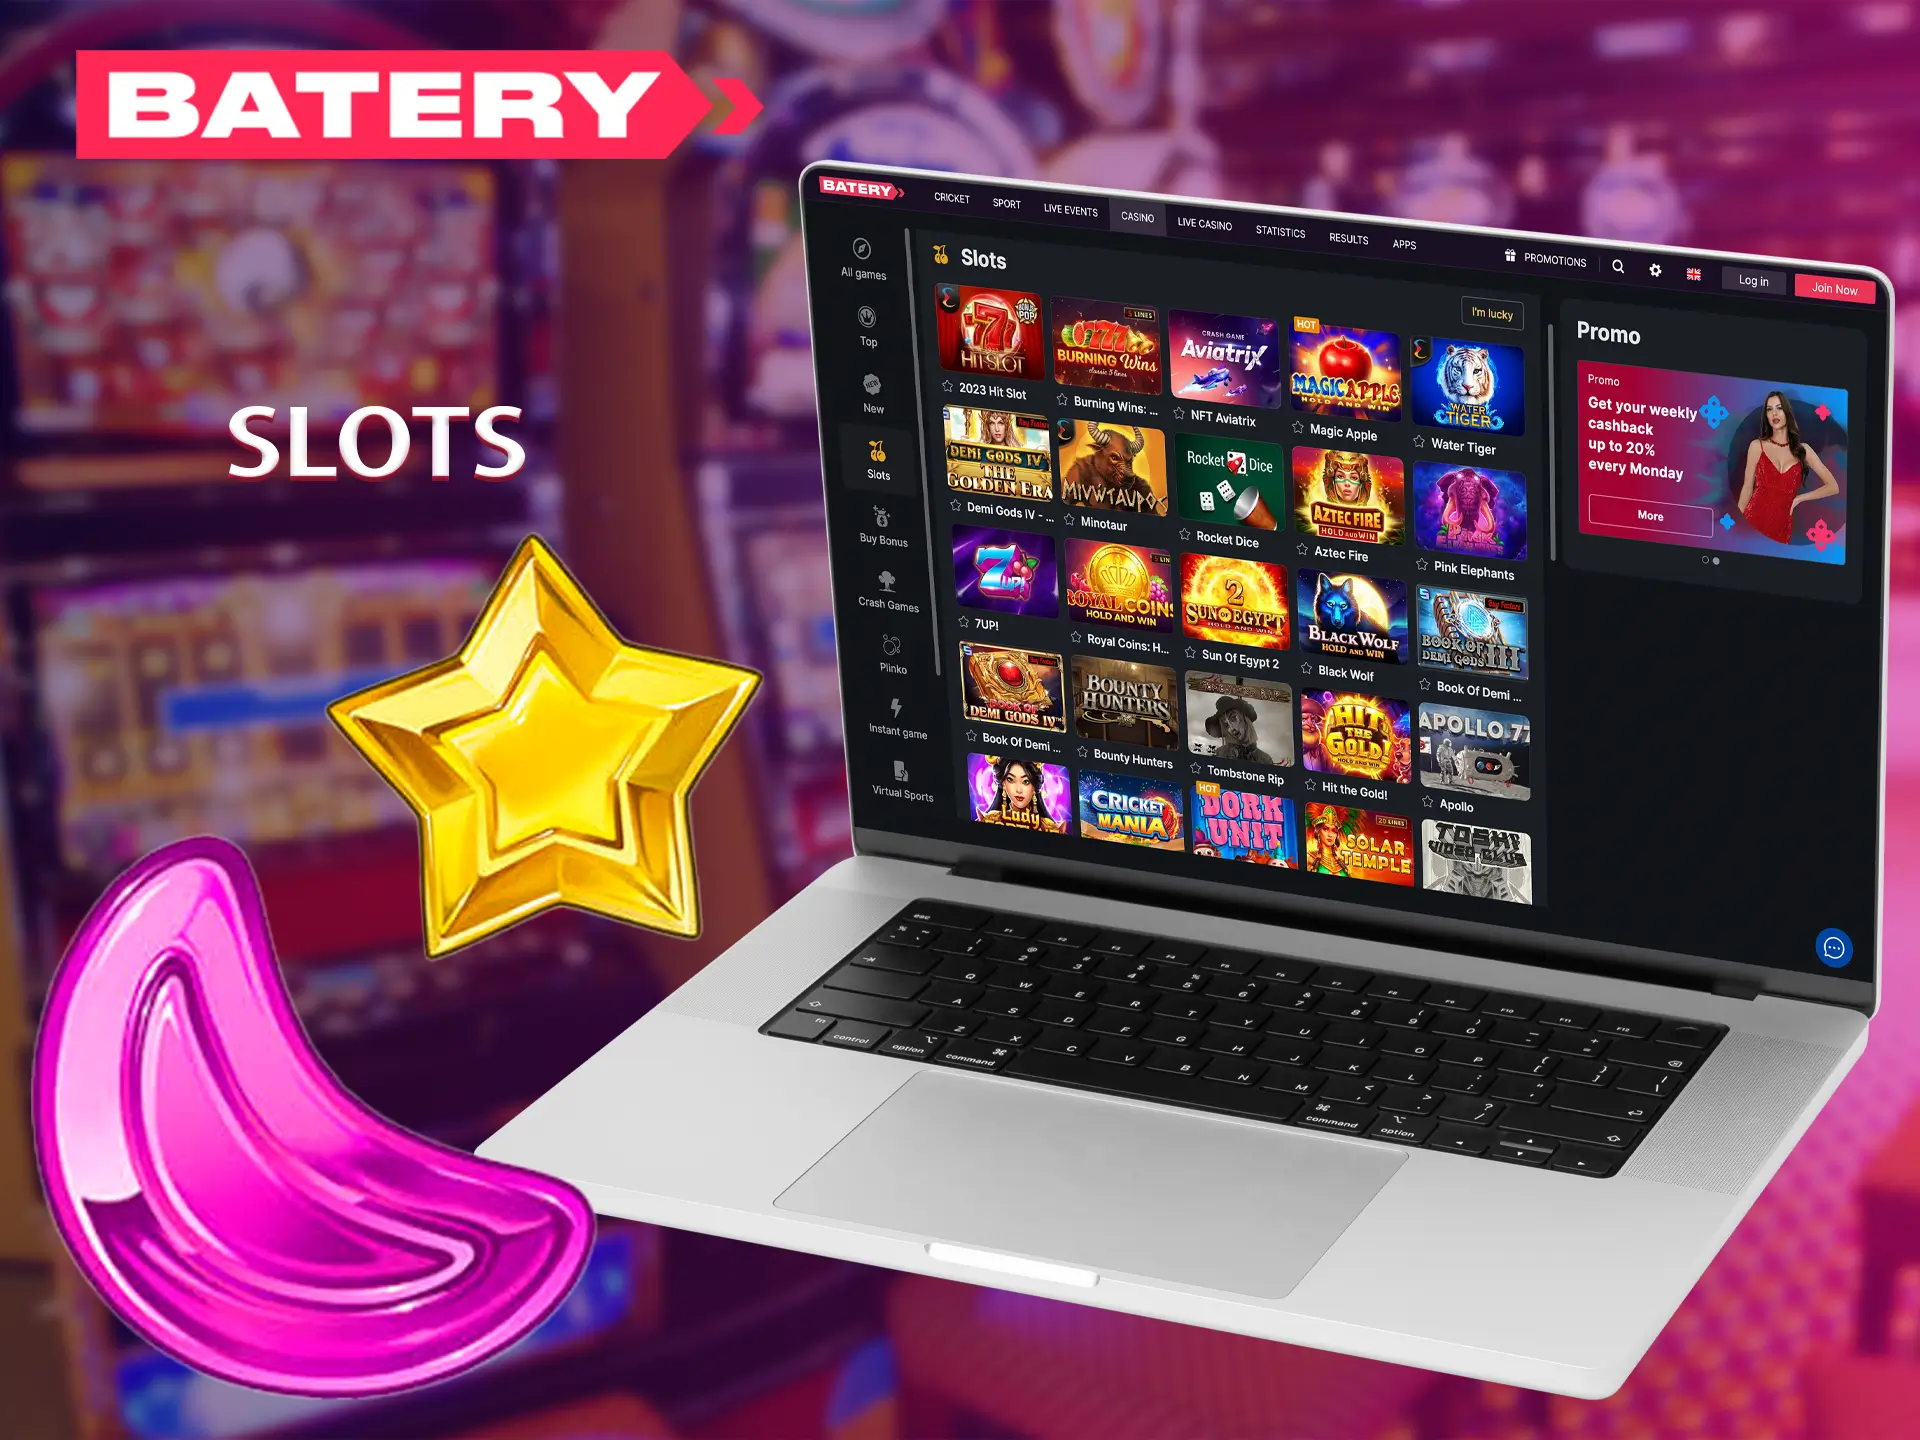 Plenty of slots are available to play at Batery Casino.